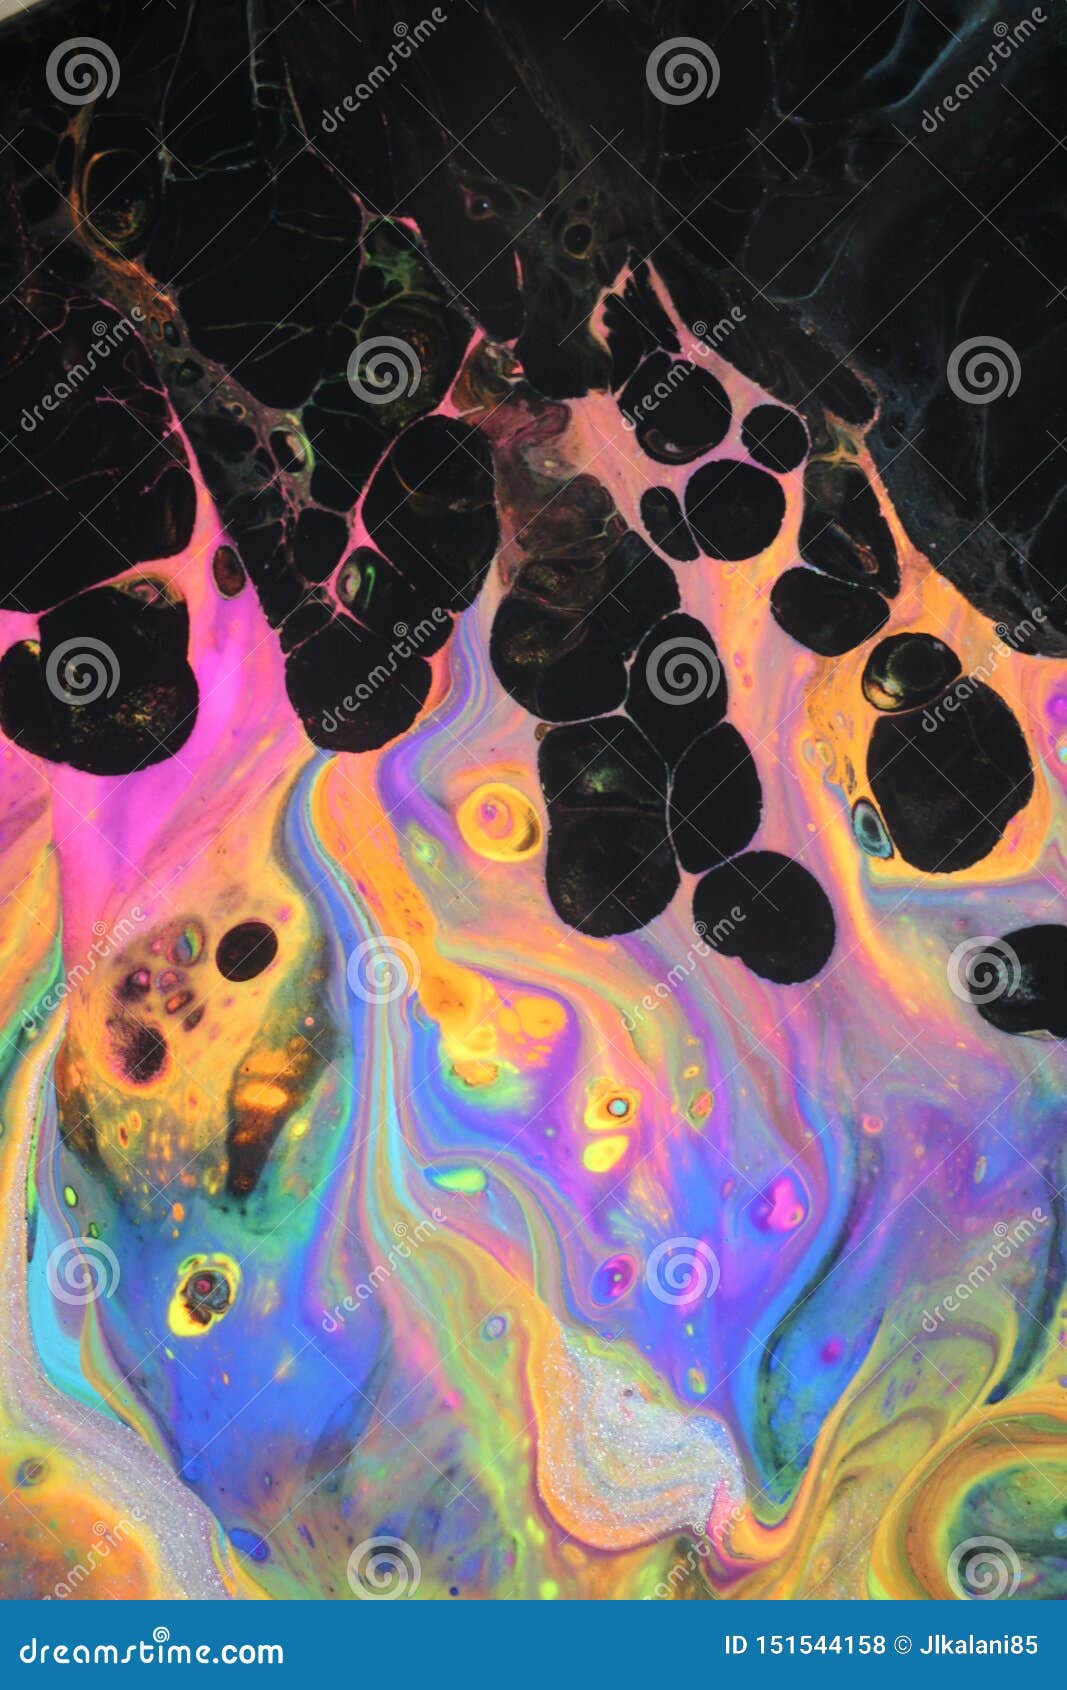 abstract acrylic pour painting that resembles neon dancing flames.